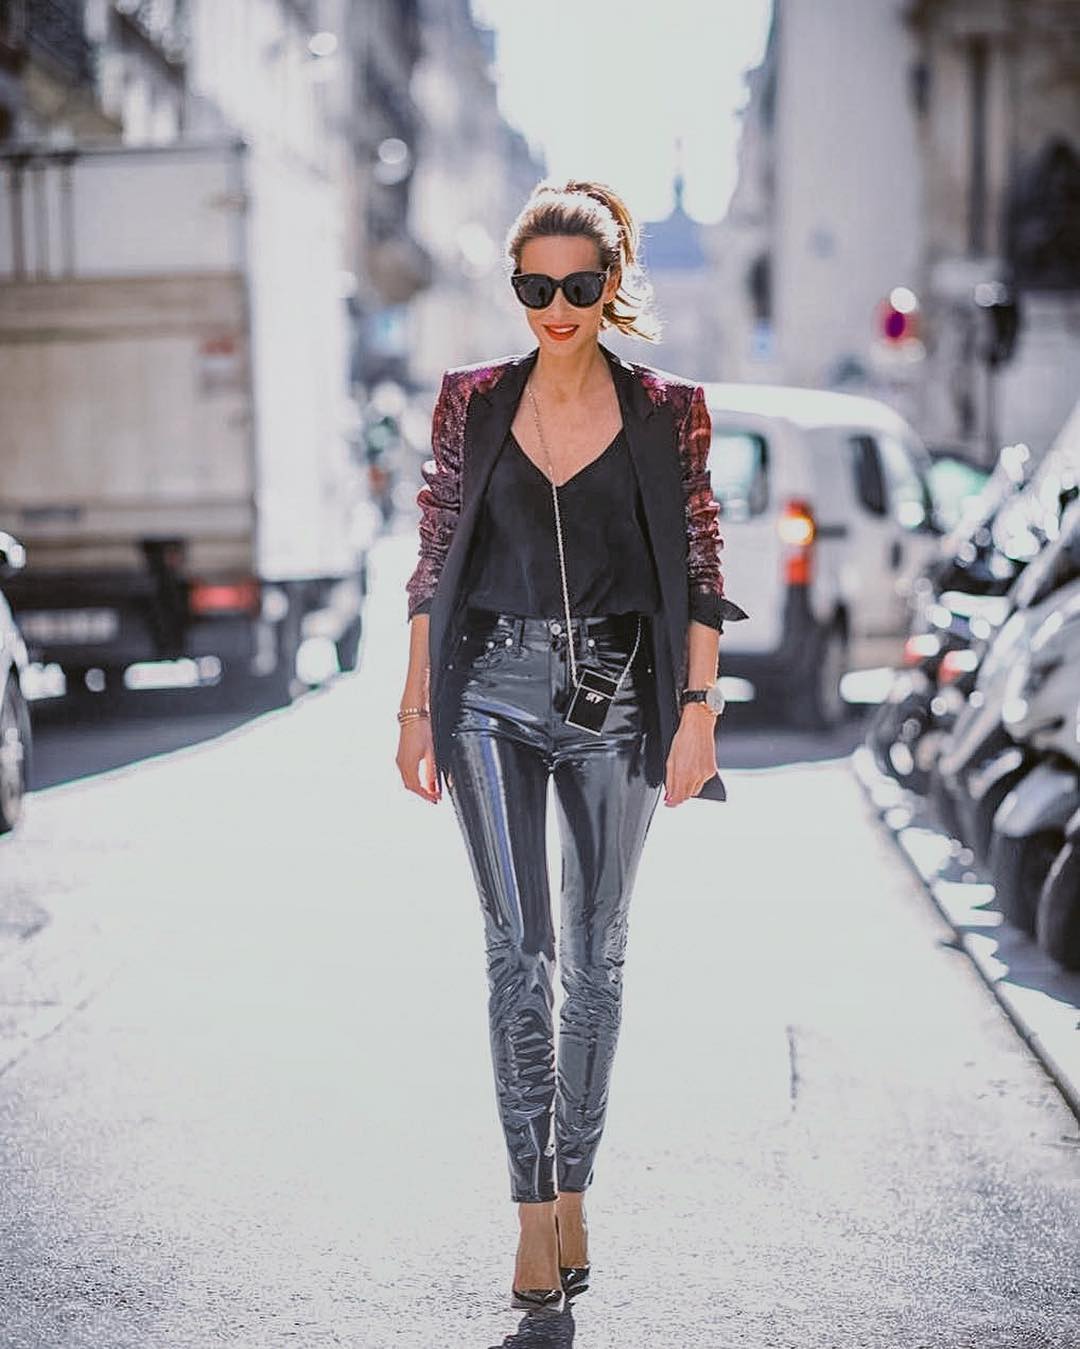 Velour Blazer And Glossy Leather Pants
Outfit